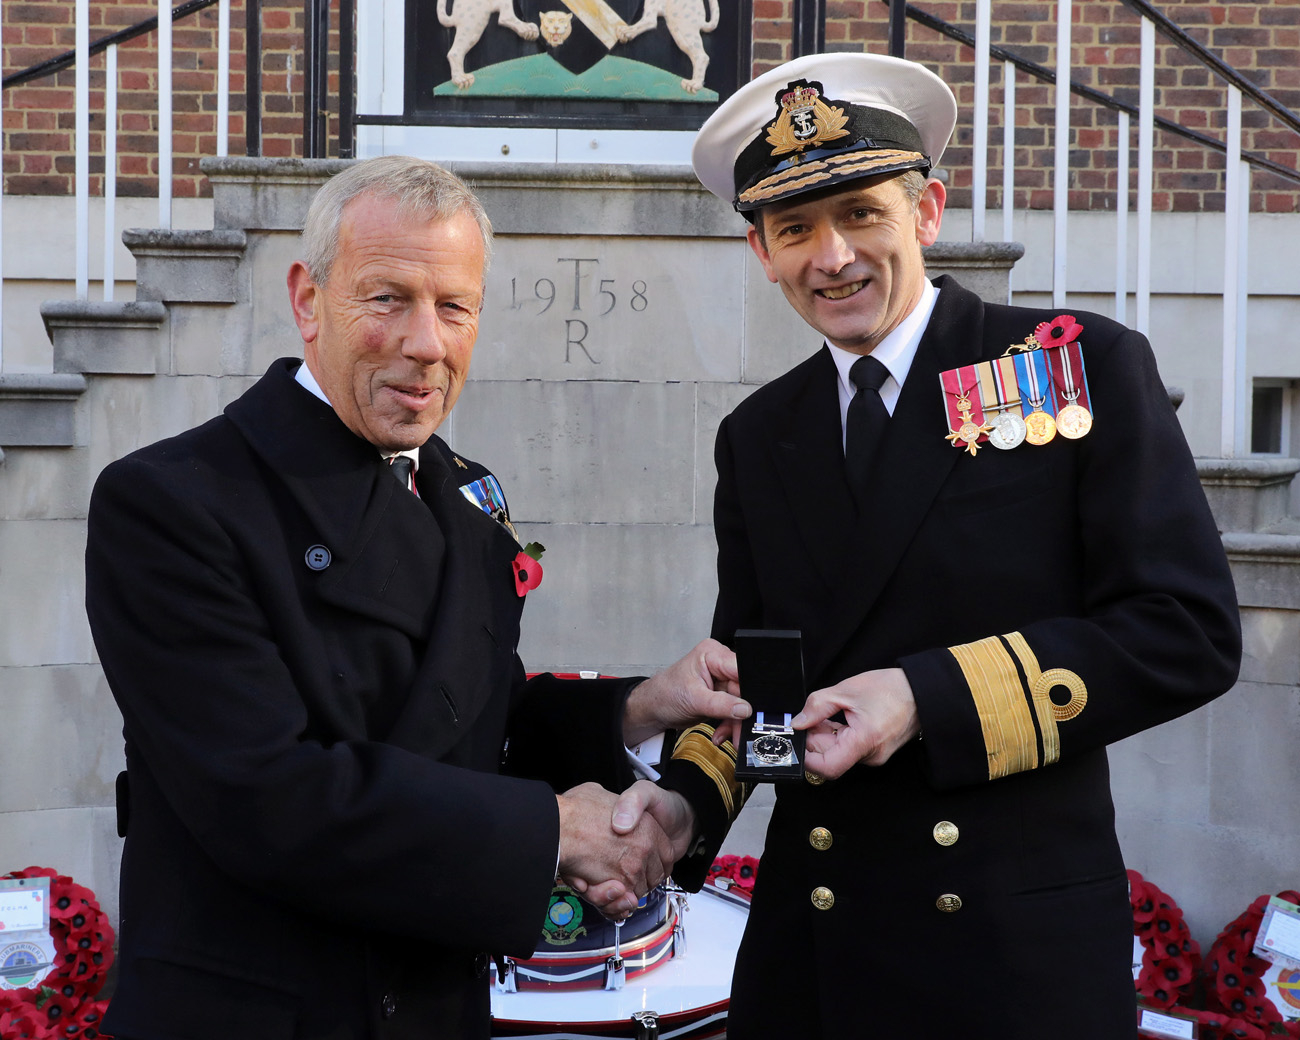 Submariners' Remembrance Service and Parade